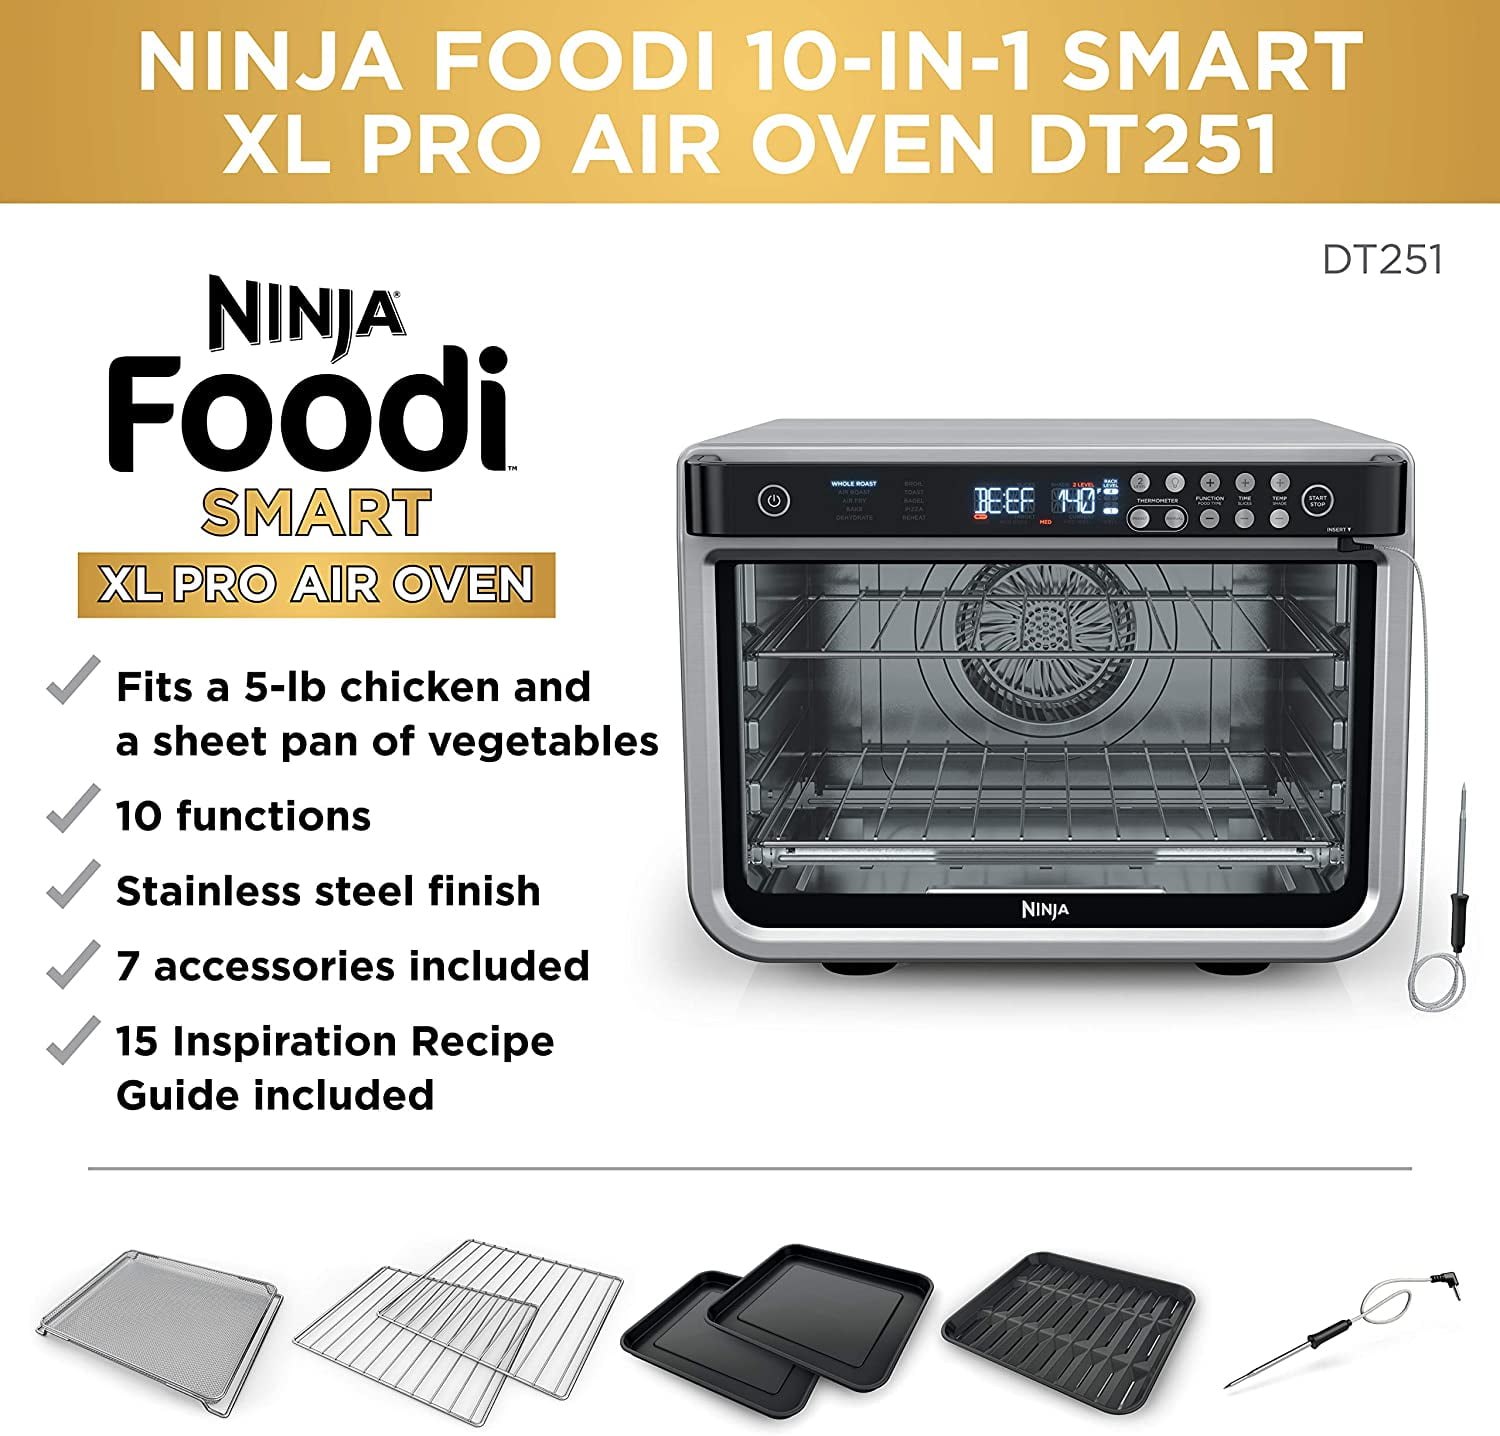 Ninja Foodi 10-in-1 Multifunction Oven [DT200UK] Mini Oven, Countertop  Oven, Air Fry, Pizza, Silver/Black 220-240 VOLTS NOT FOR USA